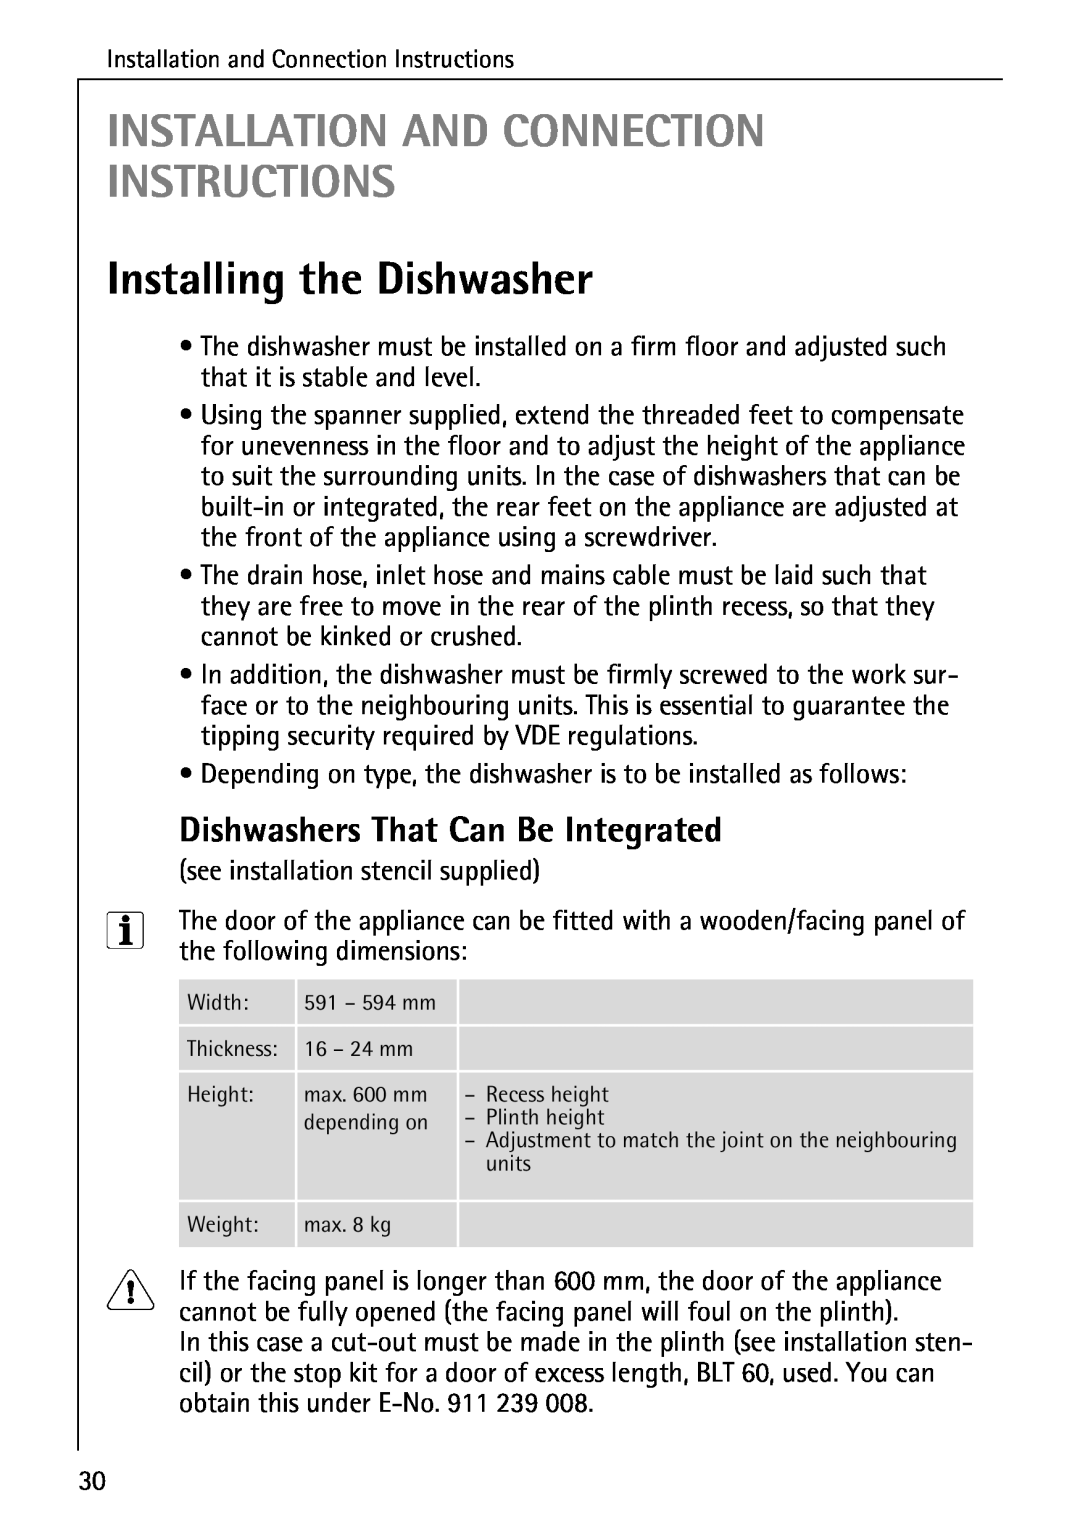 AEG 5071 manual Installation And Connection Instructions, Installing the Dishwasher, Dishwashers That Can Be Integrated 